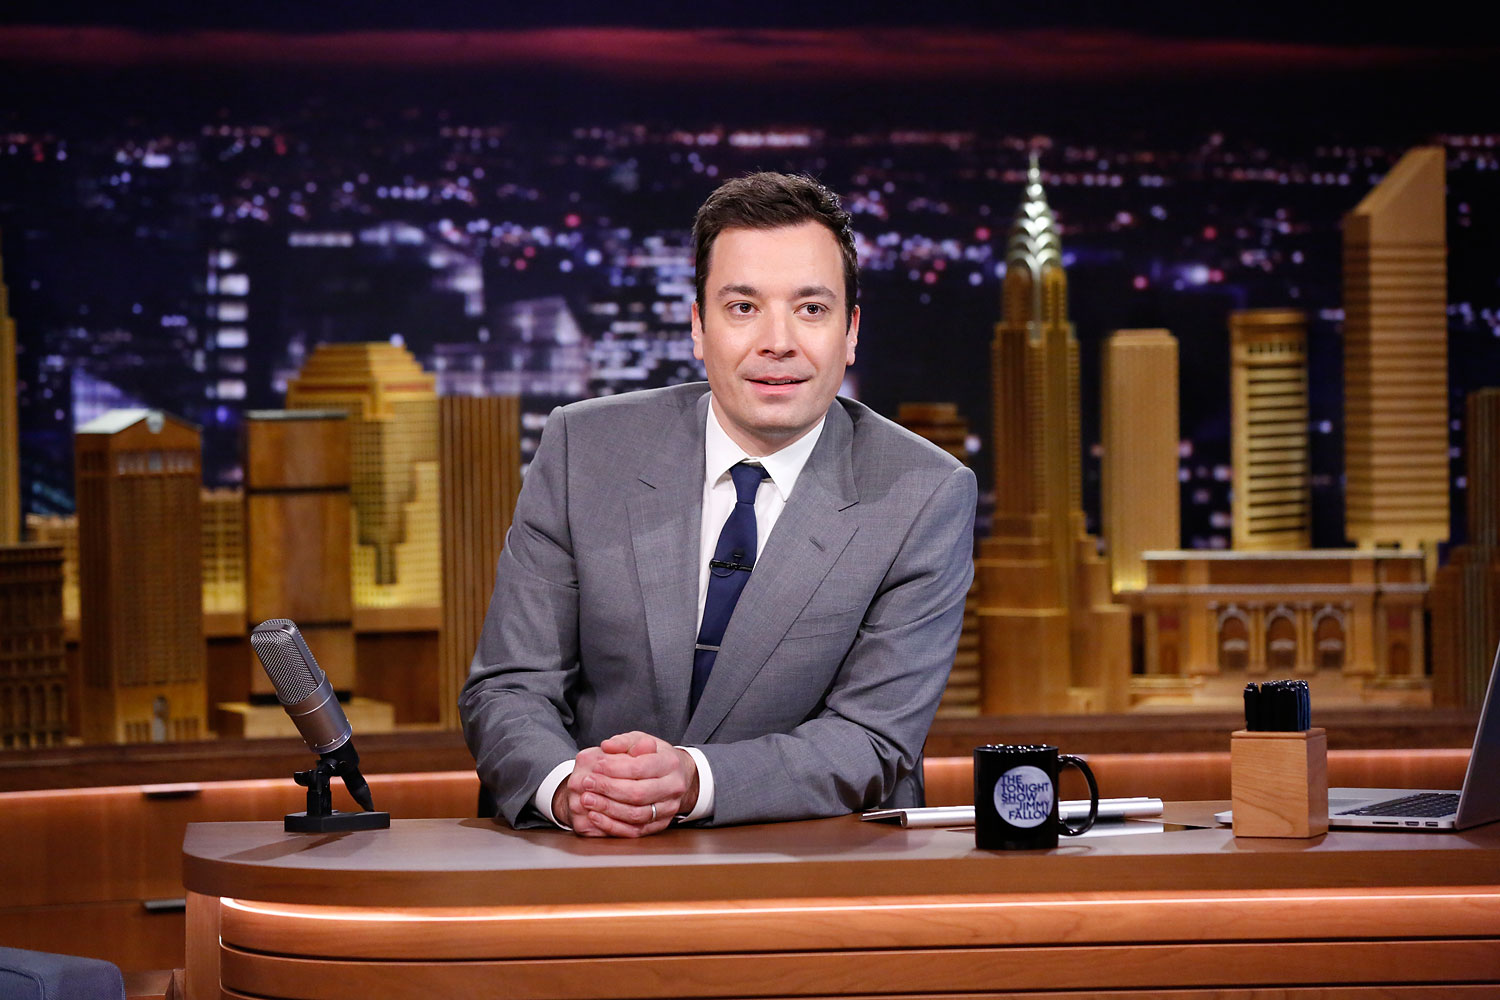 The Smartest Thing Jimmy Fallon Did on His First Tonight Show | Time